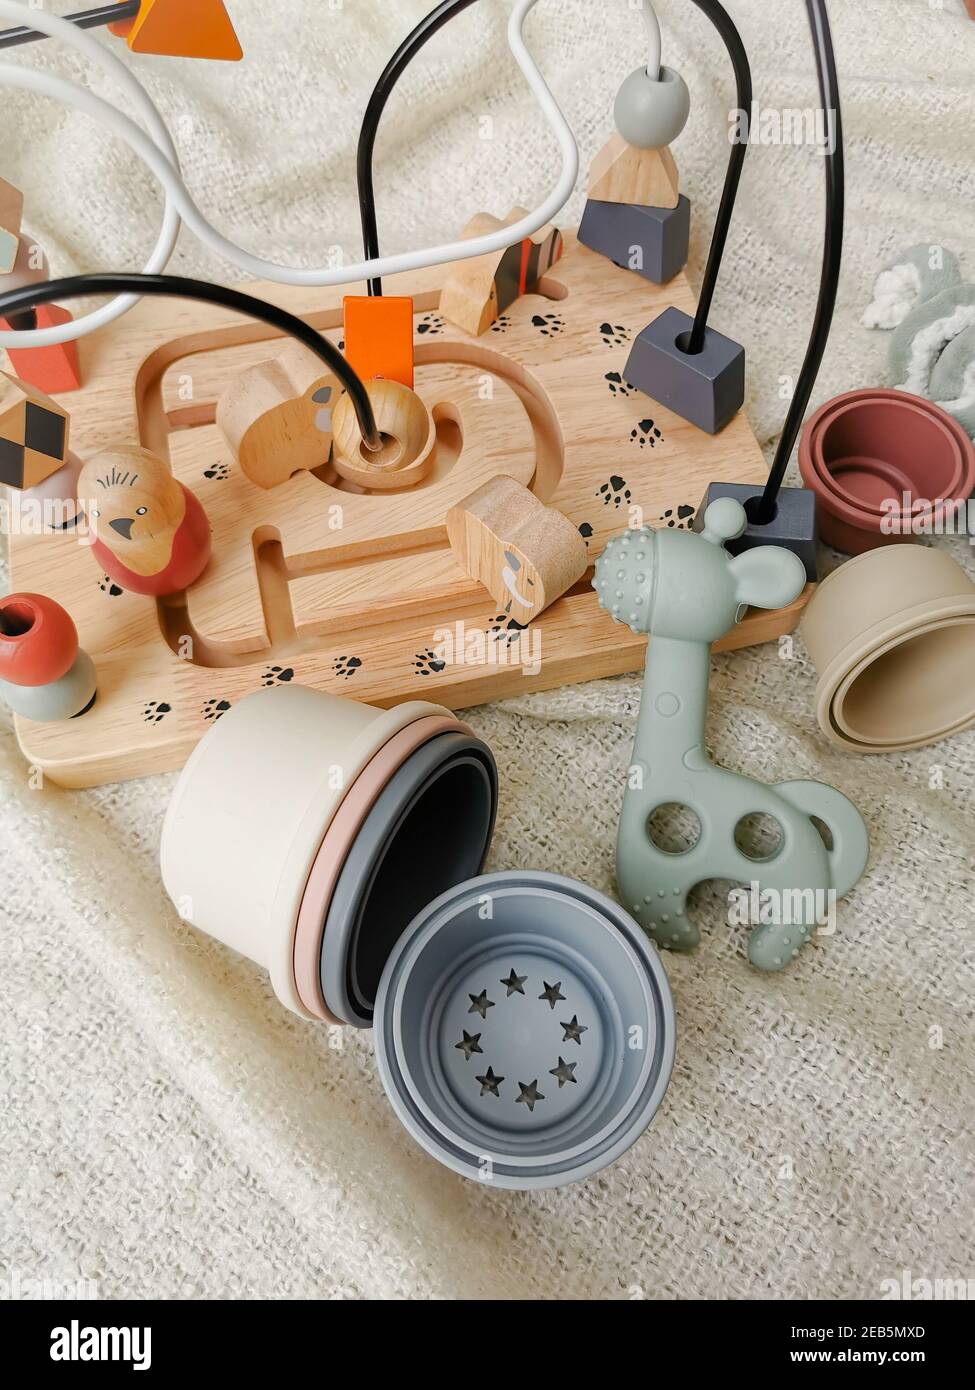 Gender neutral toys for babies in muted soft colors. Wooden blocks en bead frame, teething toy, ... Gender-neutral parenting. Stock Photo